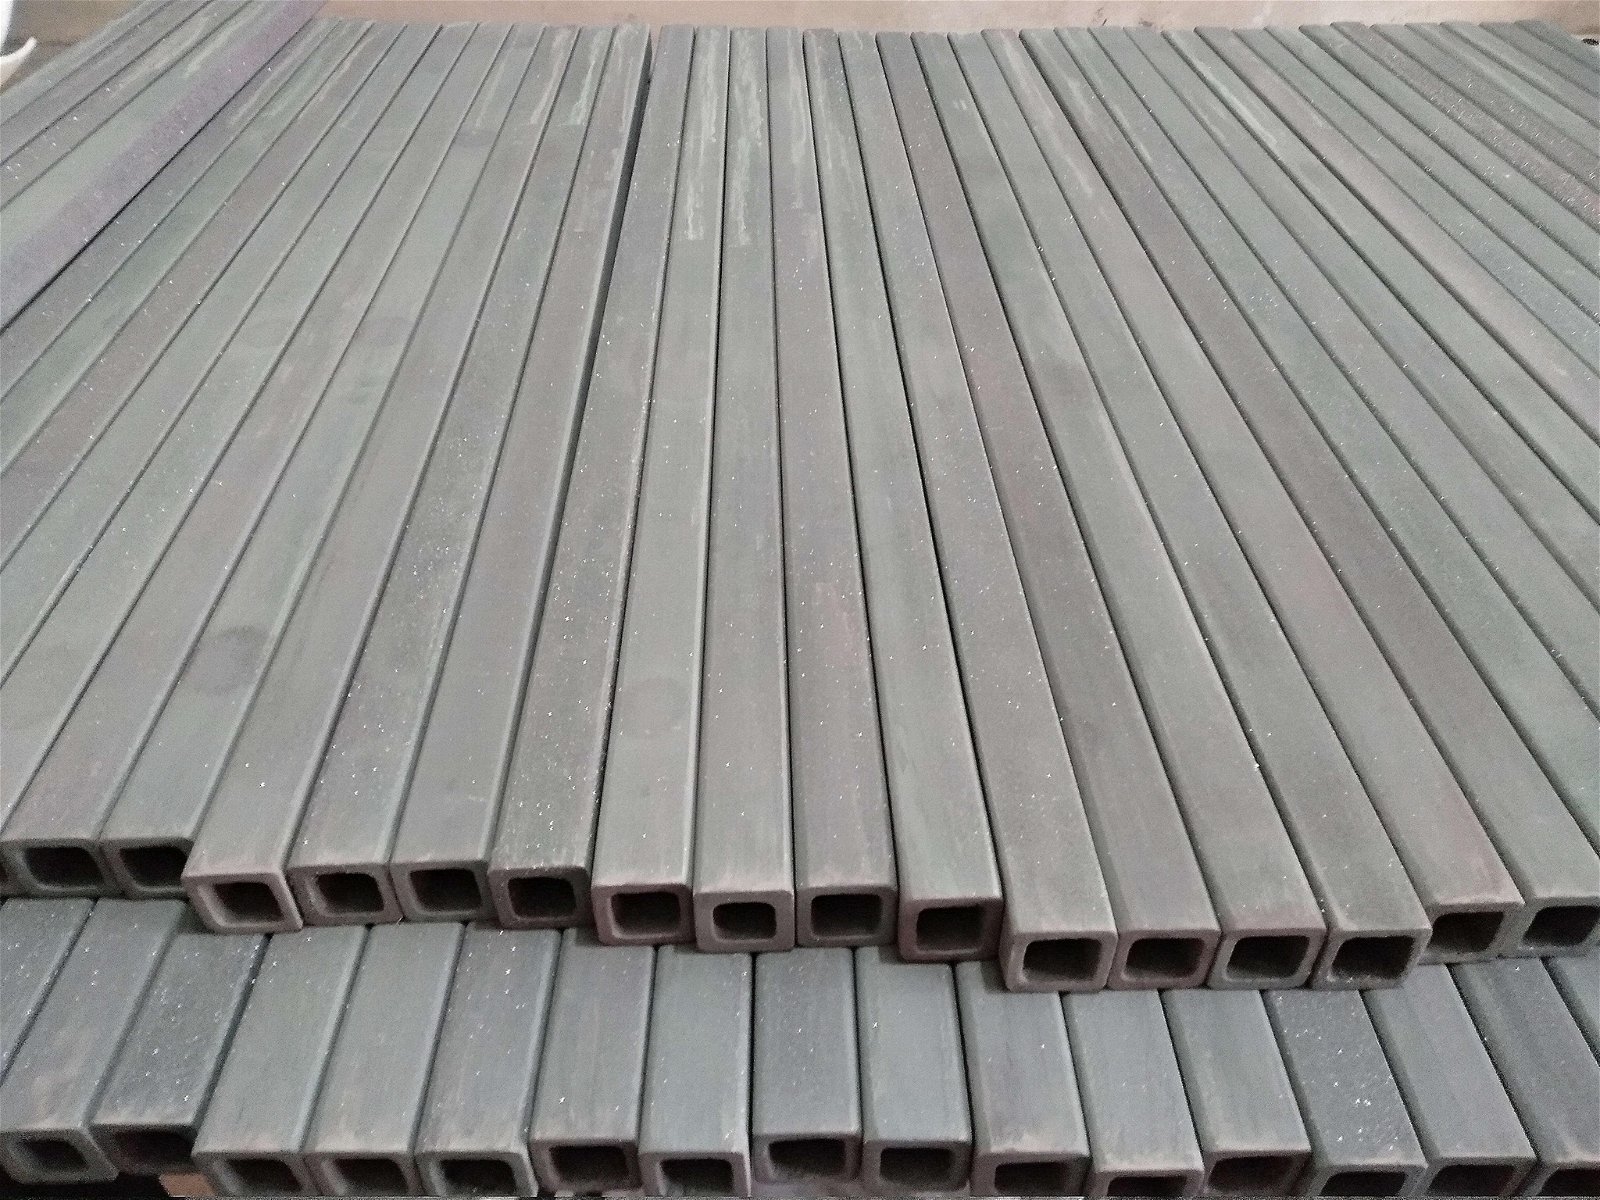 RSiC Beams, ReSiC cross beam, recrystallized silicon carbide square tubes